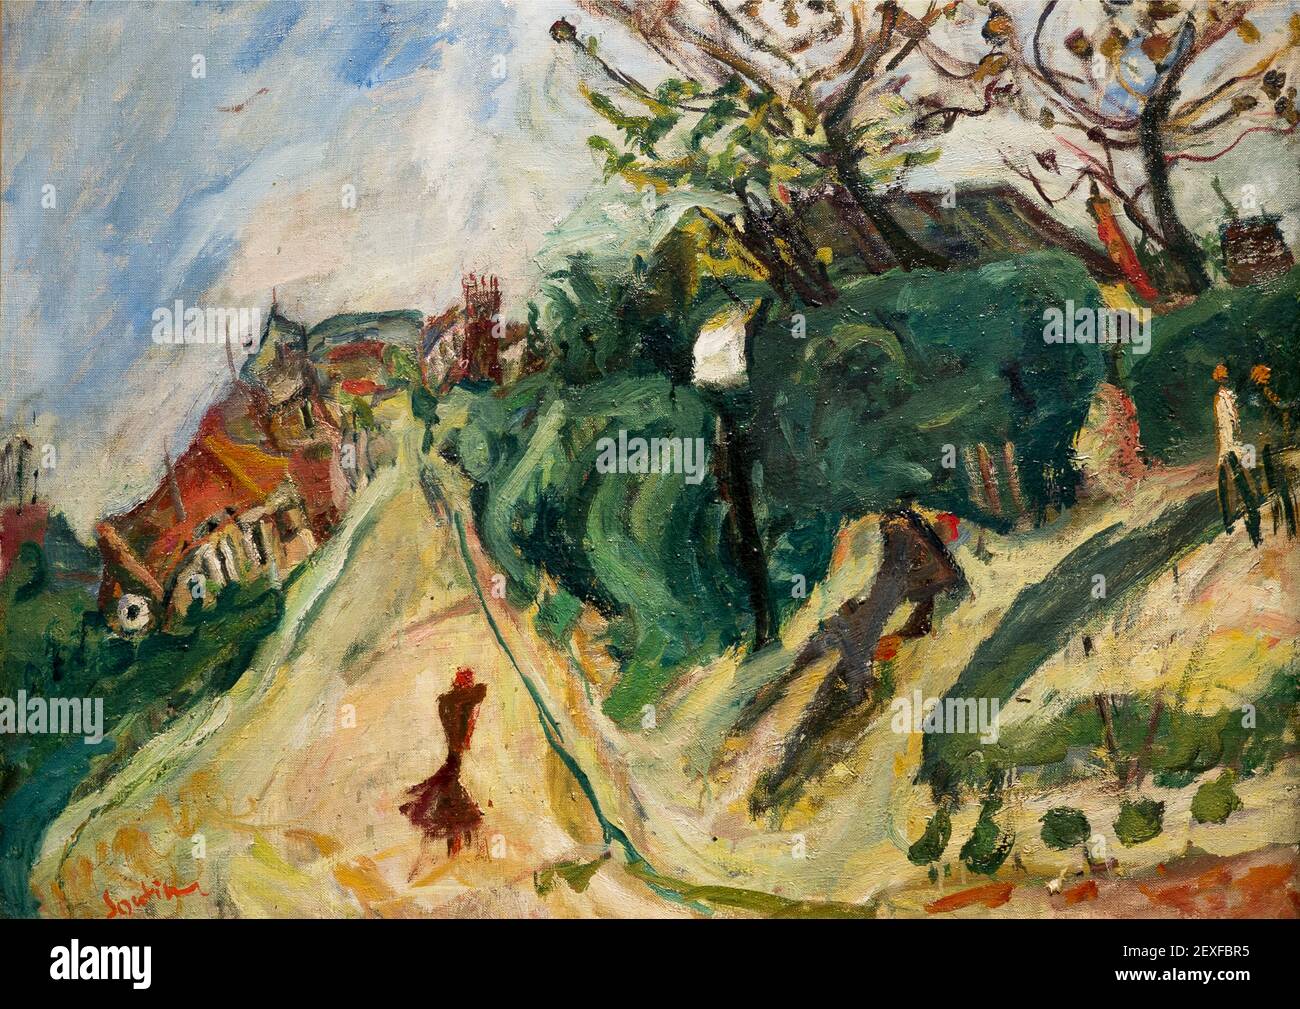 Chaim Soutine artwork entitled Landscape with Character. Stock Photo